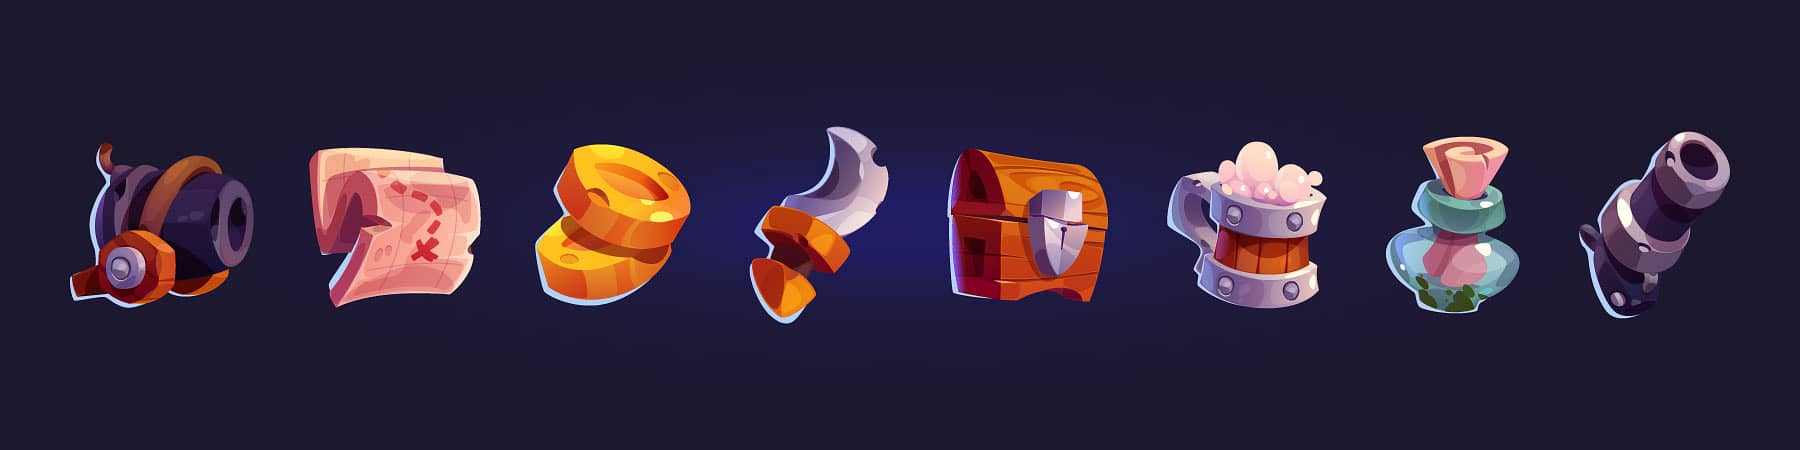 Unique 3D Graphic Design Assets and Icons - Must See! 7